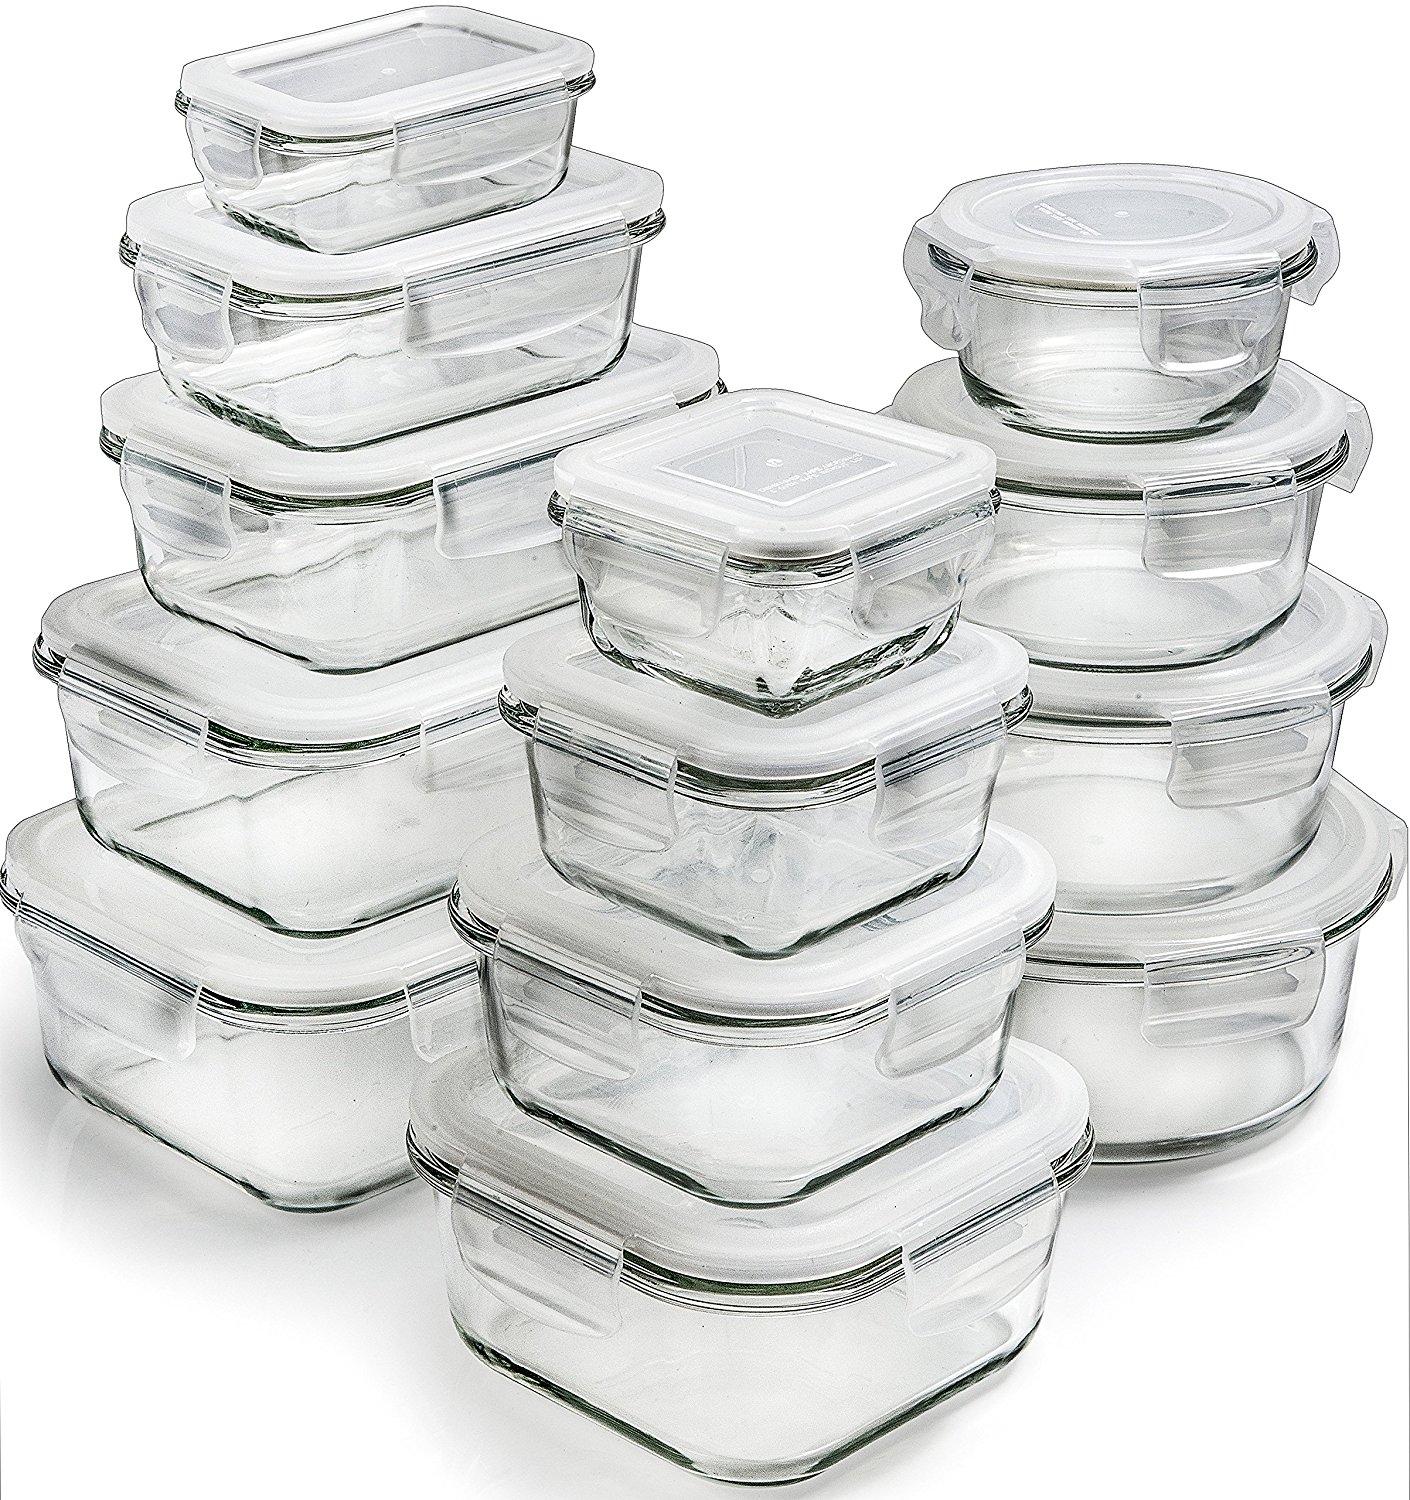   MEAL PREP CONTAINERS  